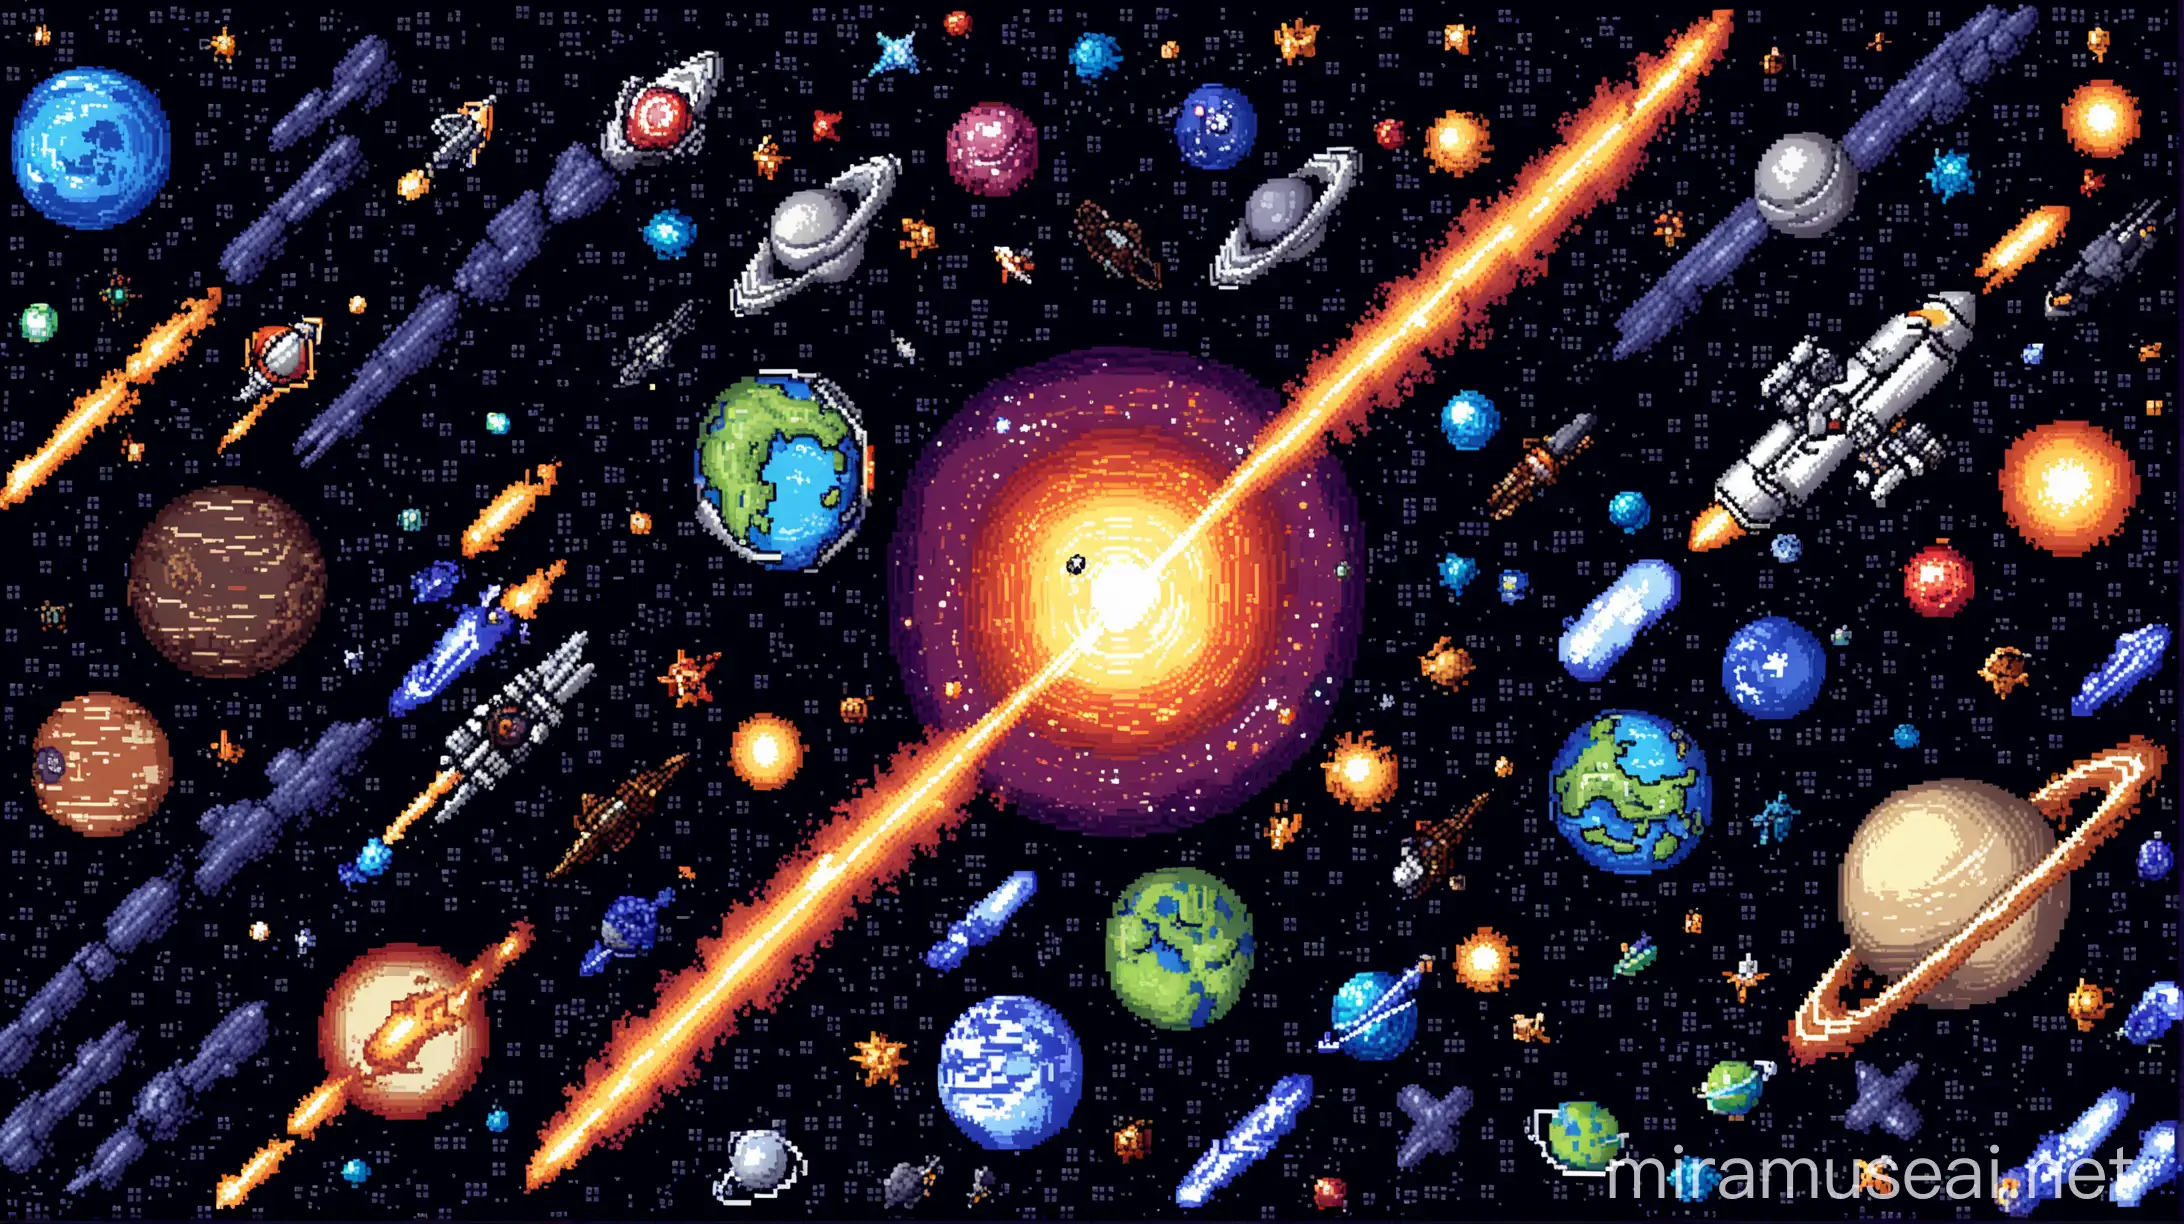 Pixel Art Space Galaxy with Meteors and Spaceships Game Menu Background